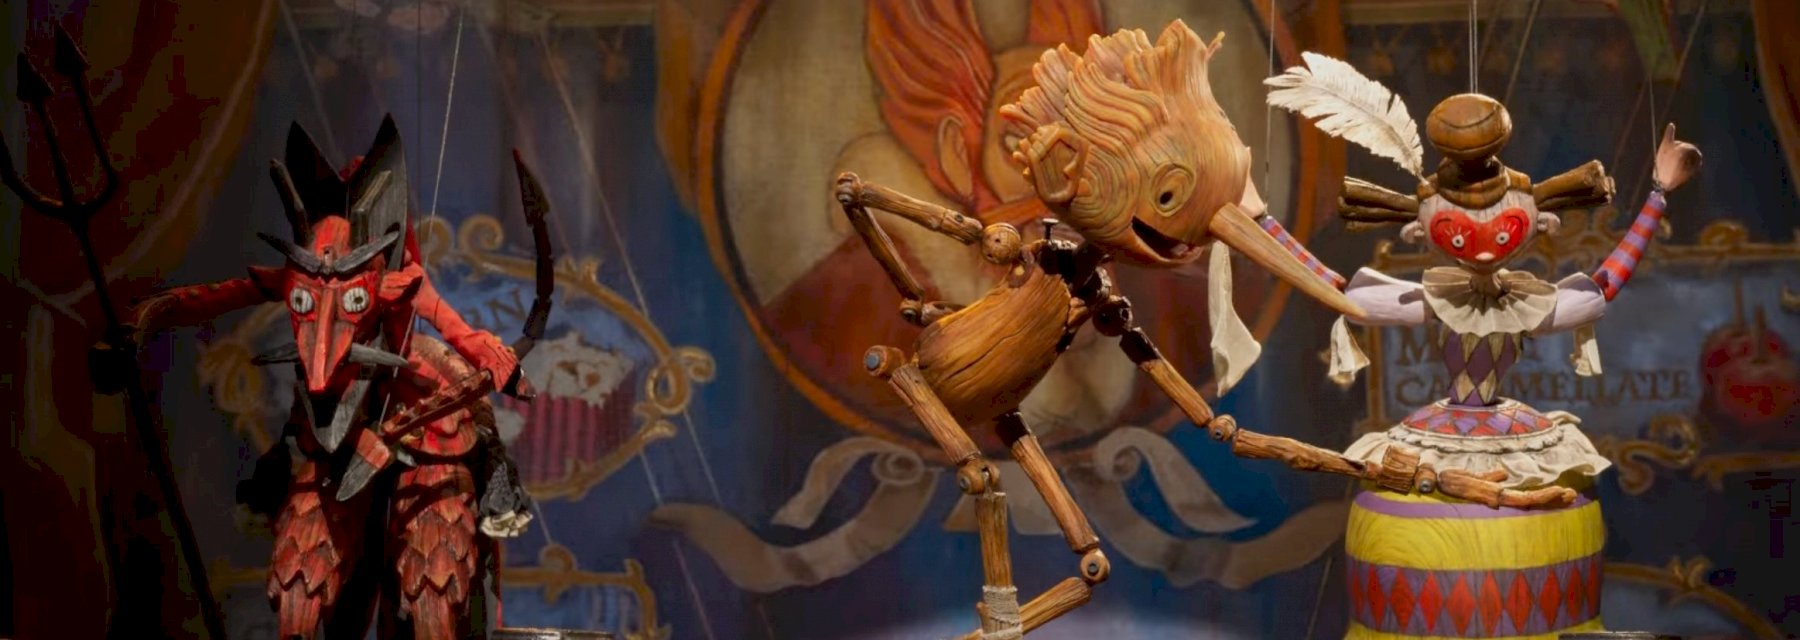 Pinocchio review – a heartwarming film about being true to yourself